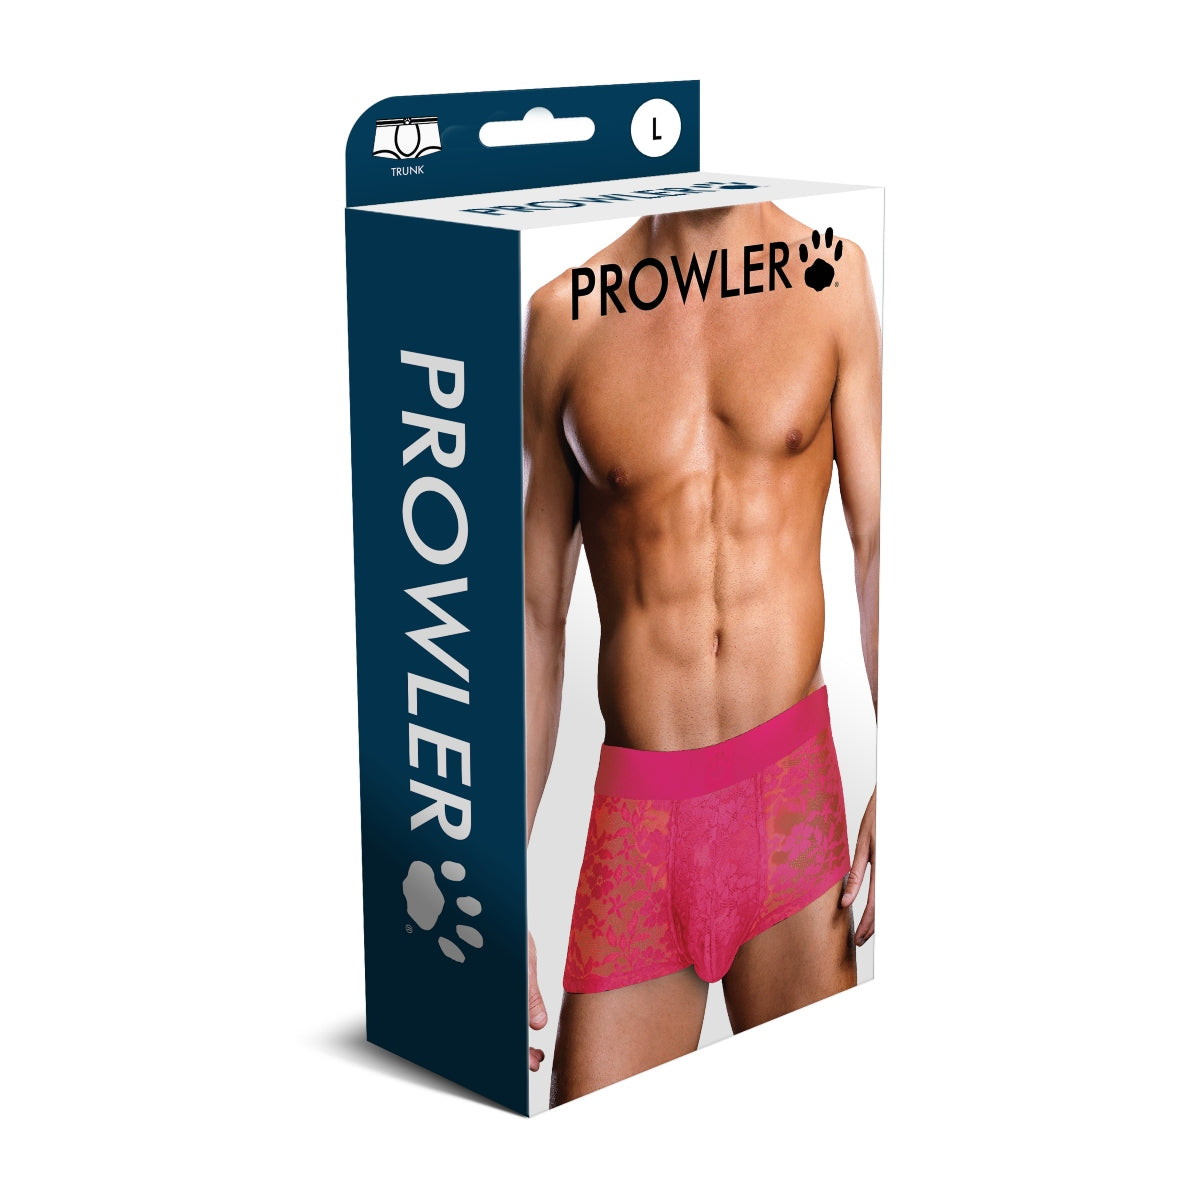 Prowler Lace Trunk Pink (8206193033455)